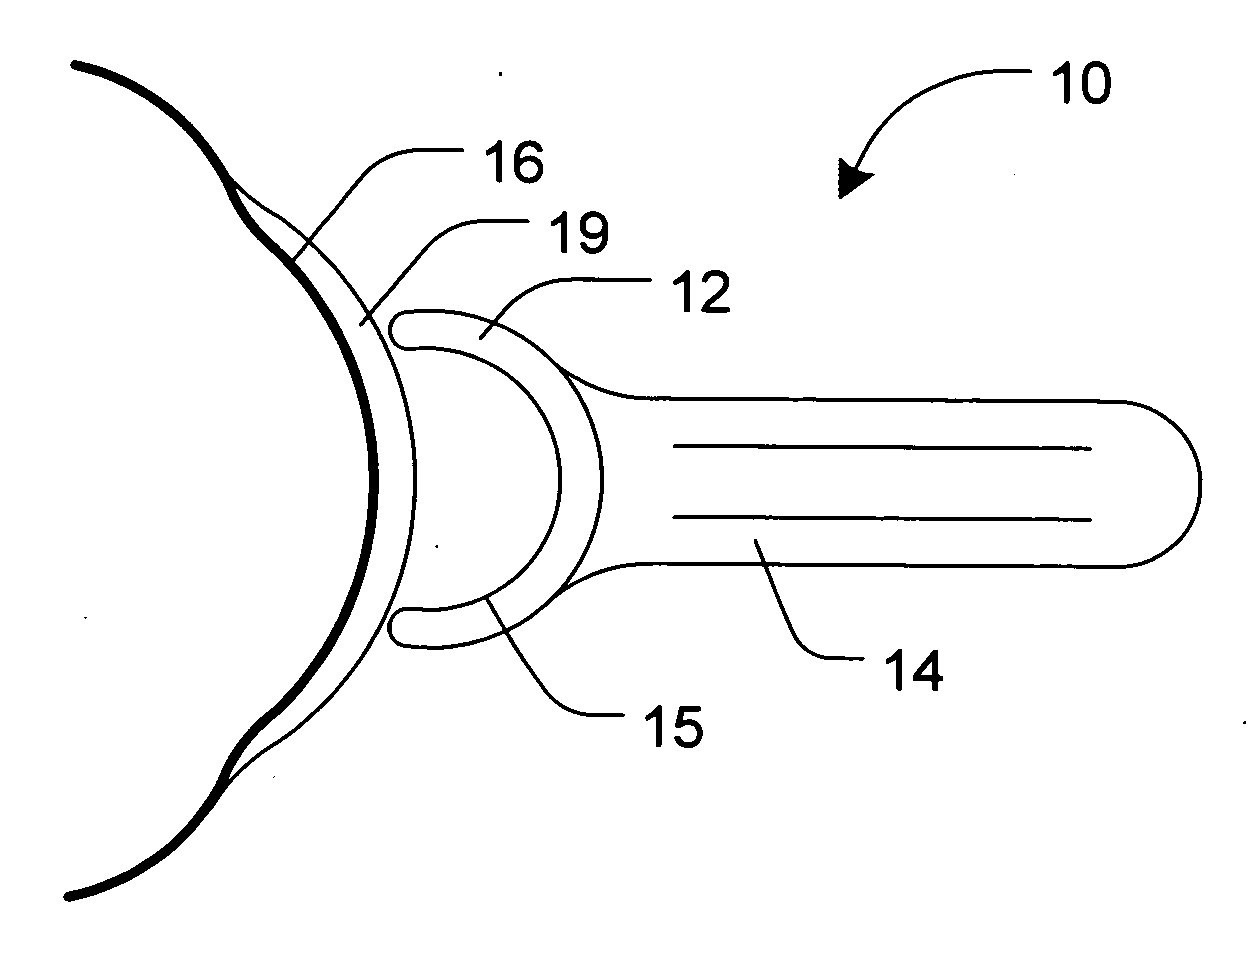 Contact lens device to remove or assist in the removal of a contact lens